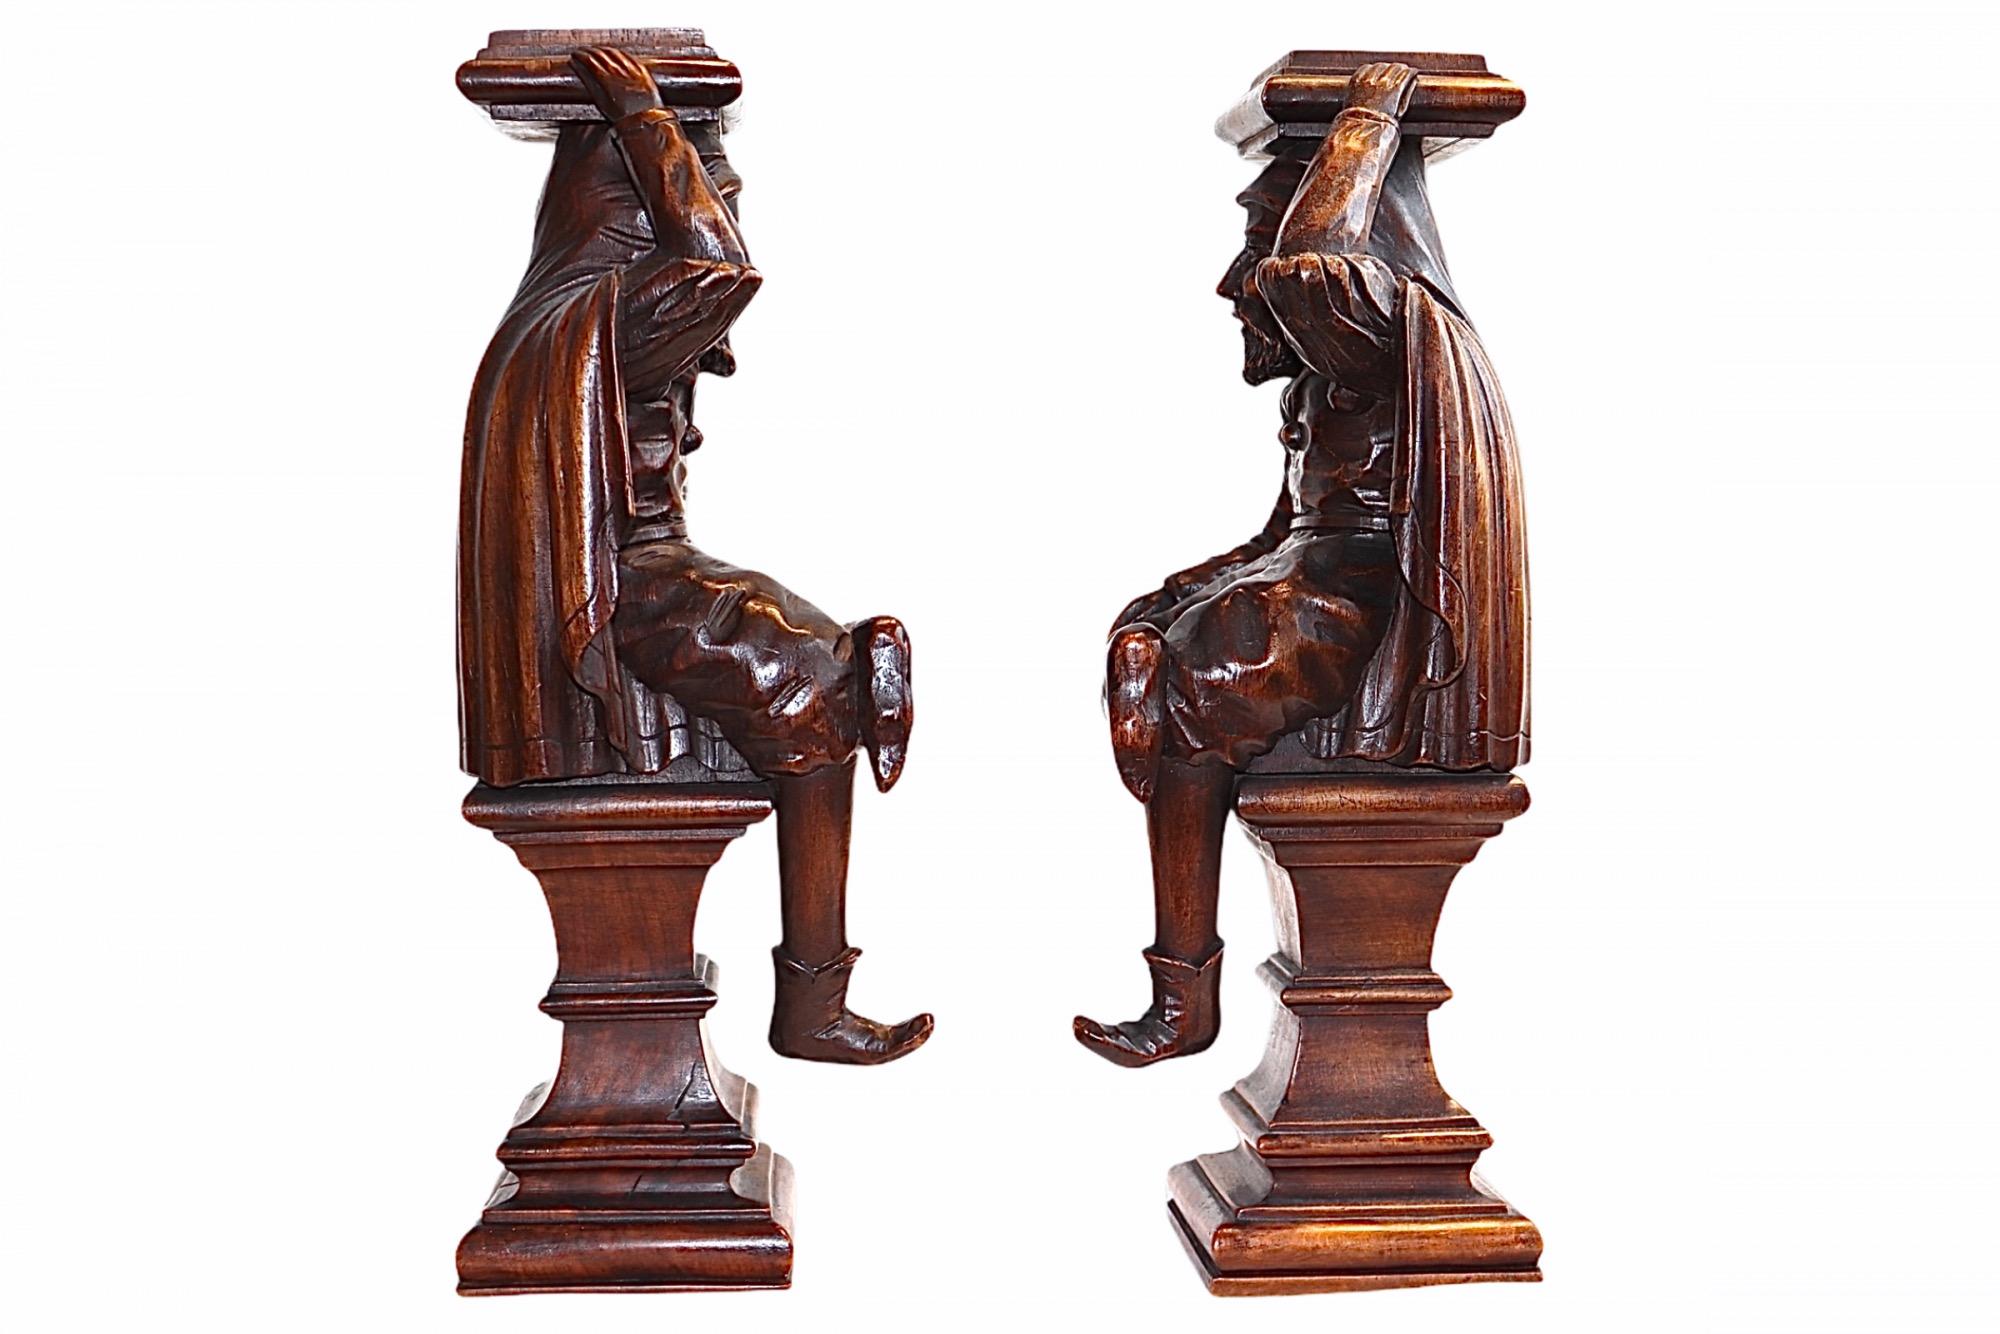 Baroque Pair of English Carved Walnut Wood Figures of Court Jesters, 18th Century For Sale